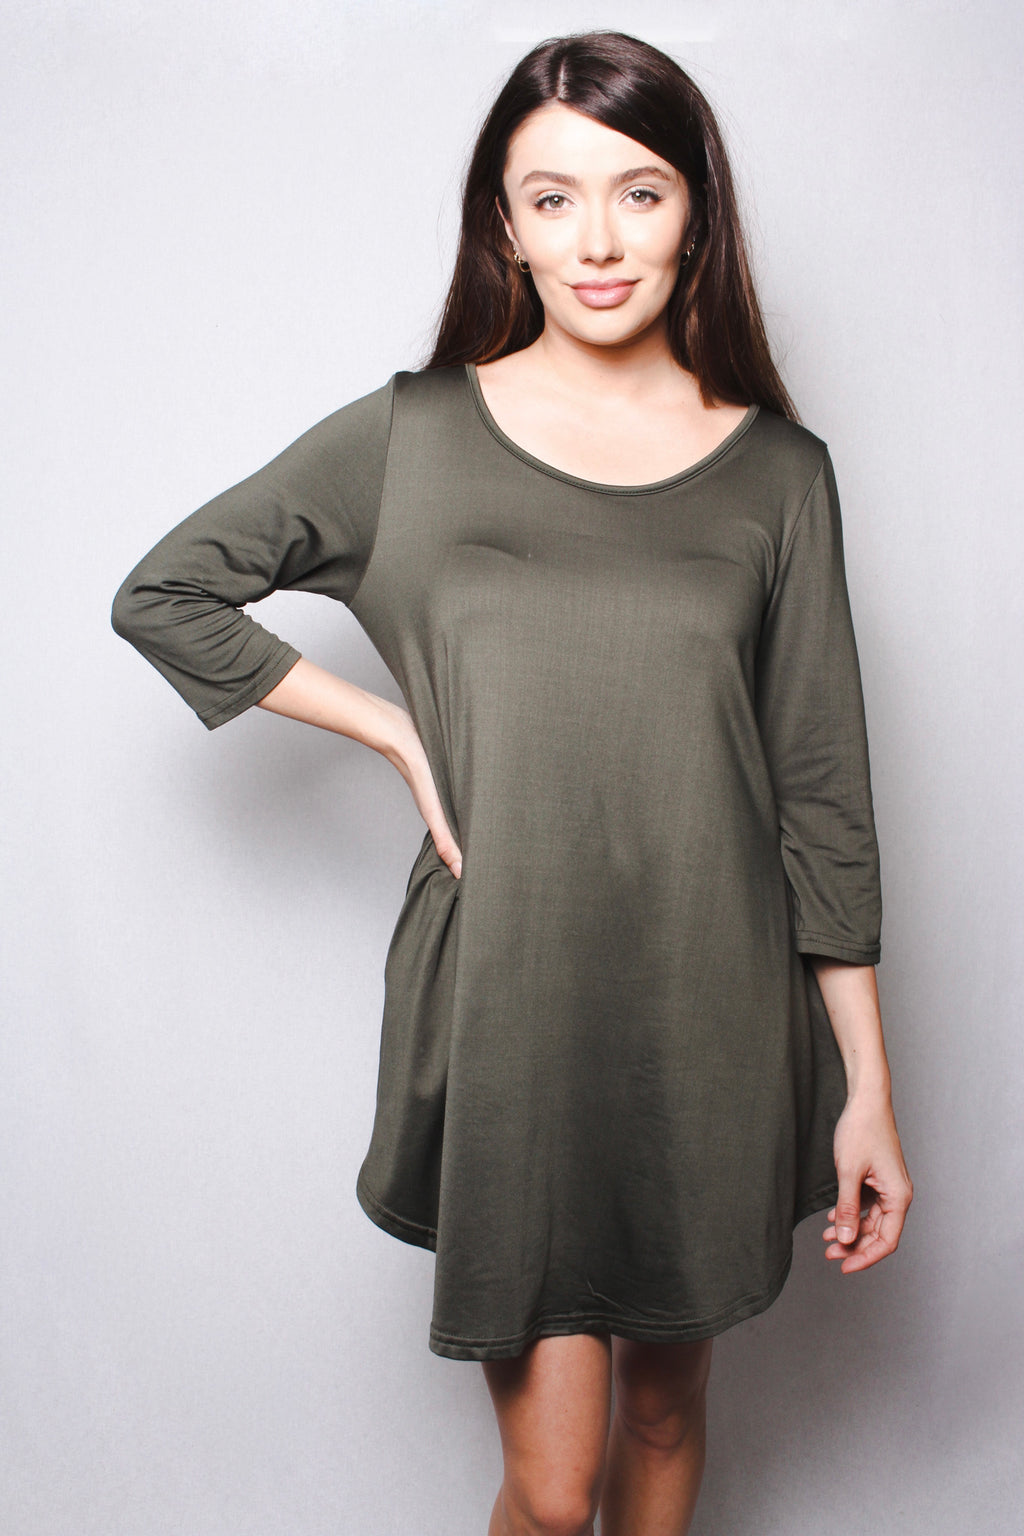 Women's Round Neck Short Sleeves Casual Tunic with Pocket